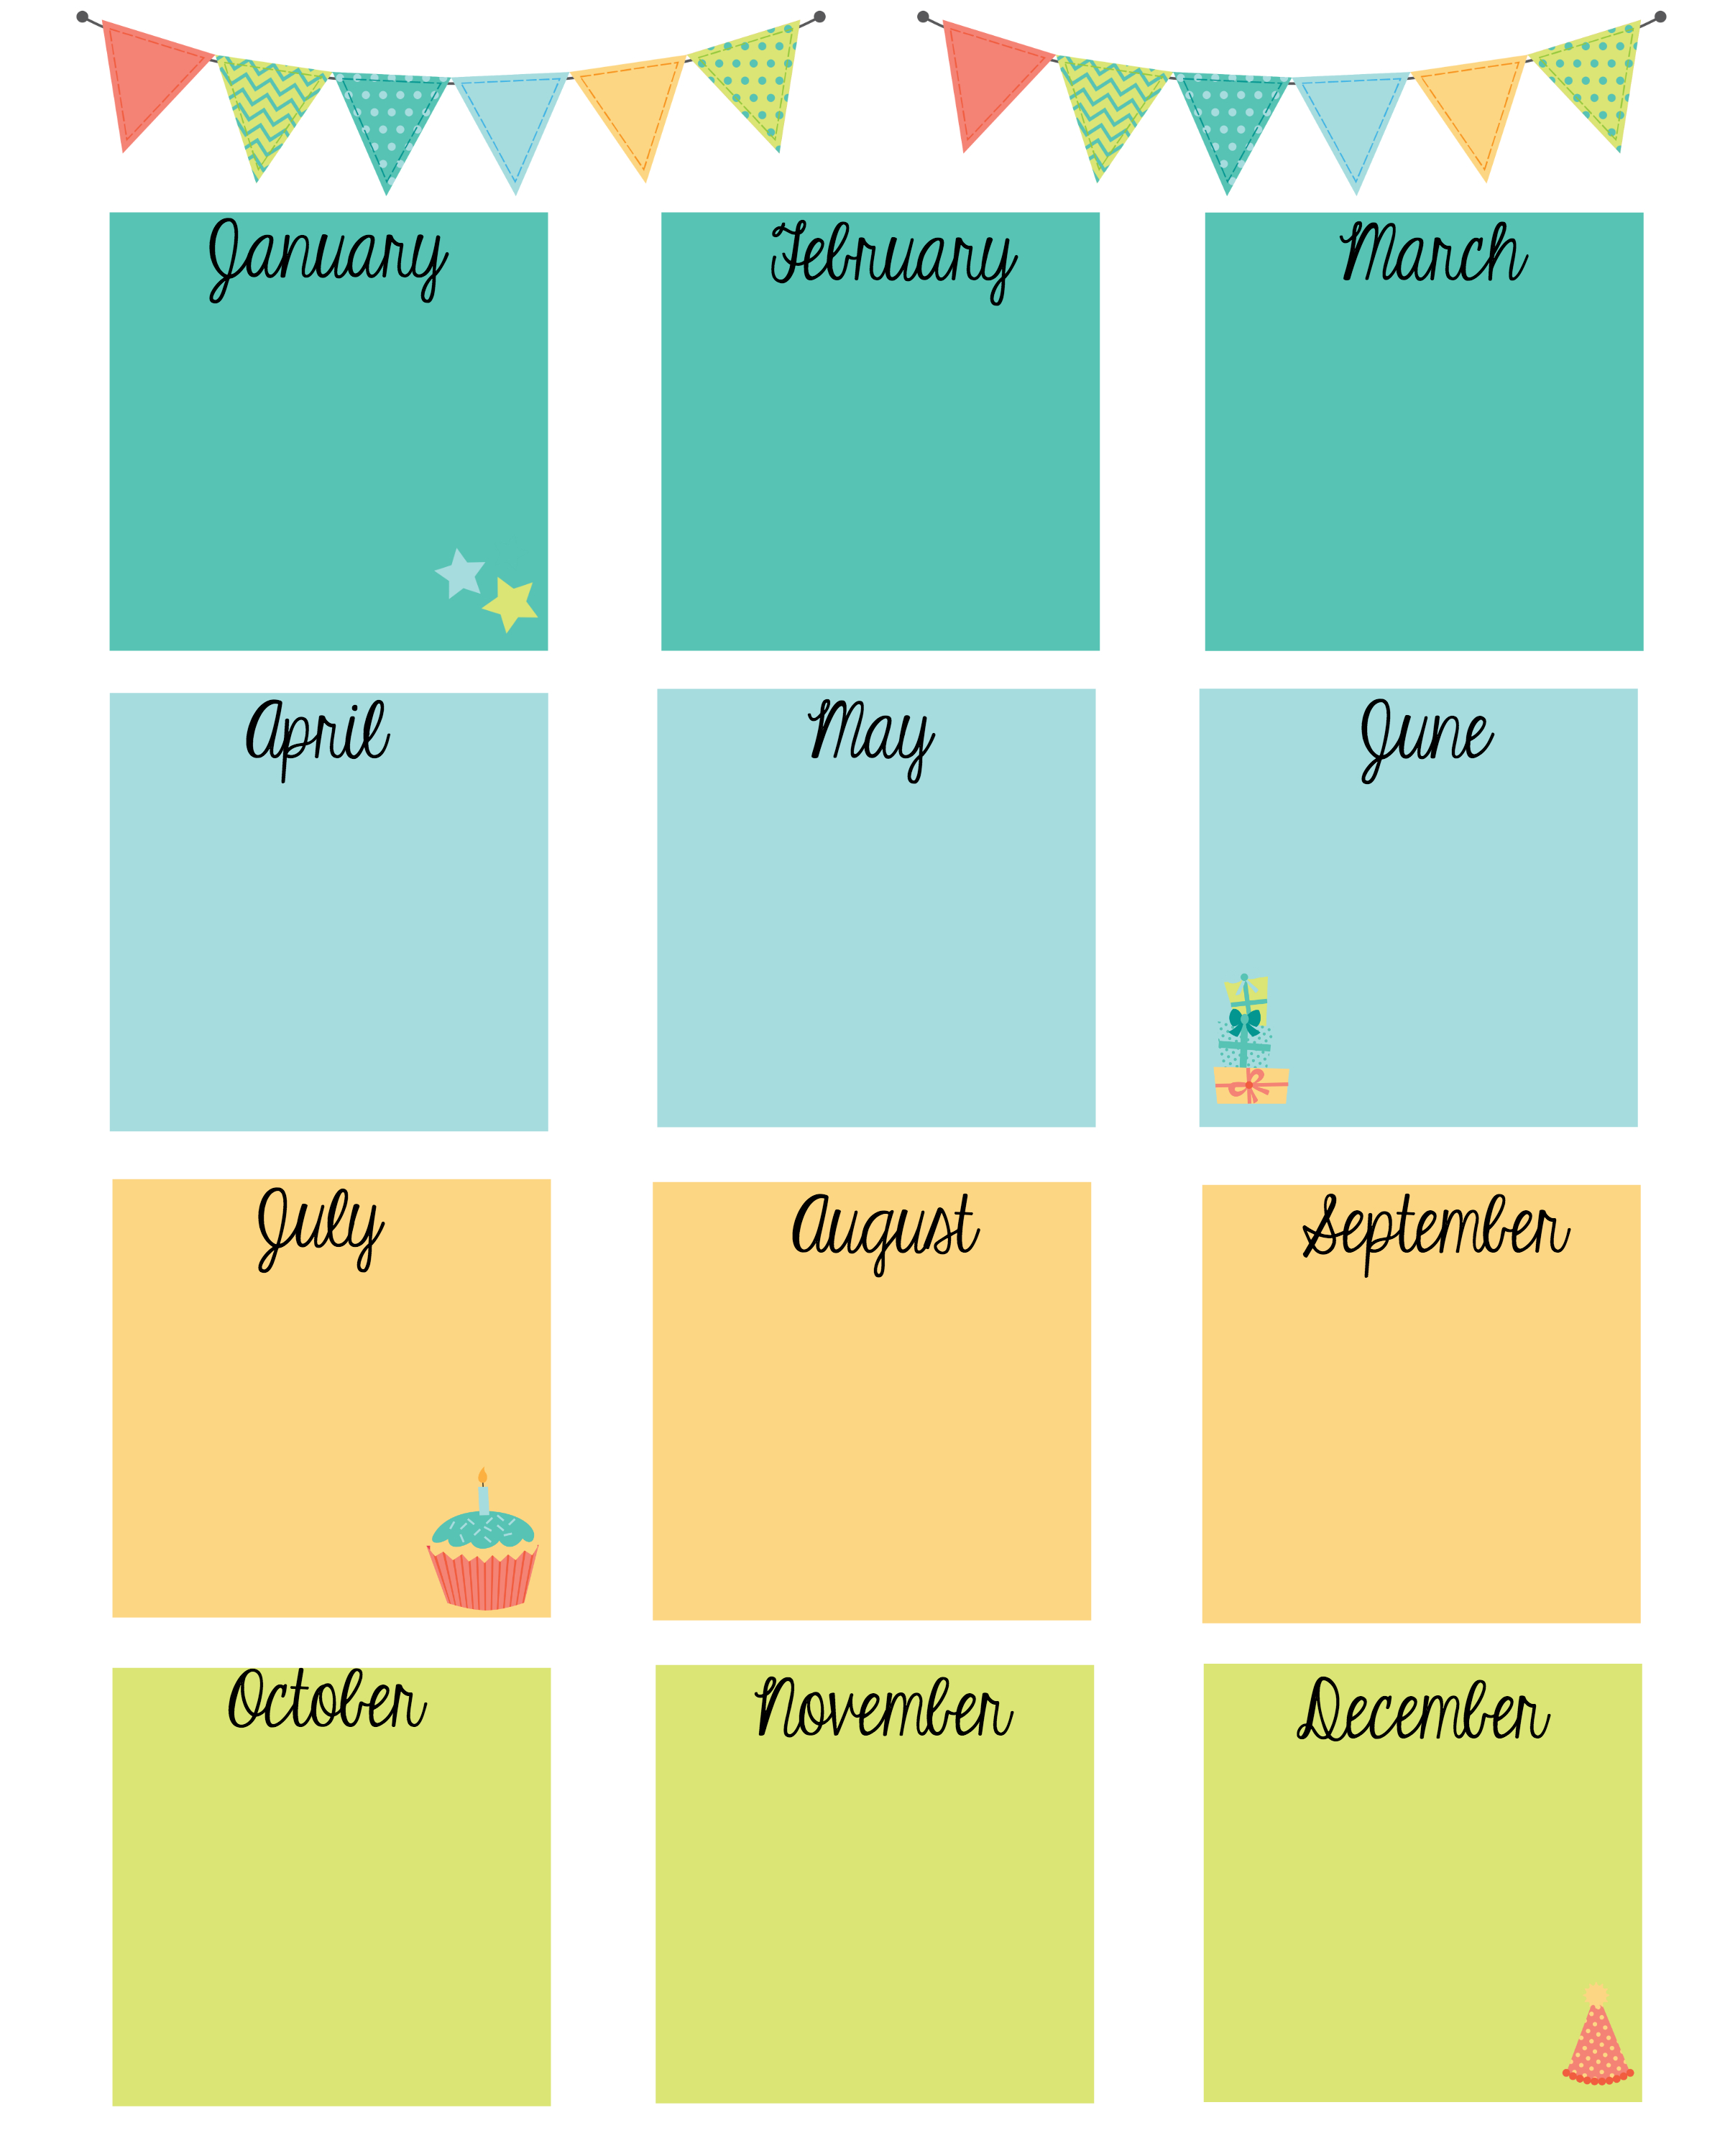 Keep In Touch With Friends With A Birthday Calendar | Calendars - Free Printable Birthday Graph